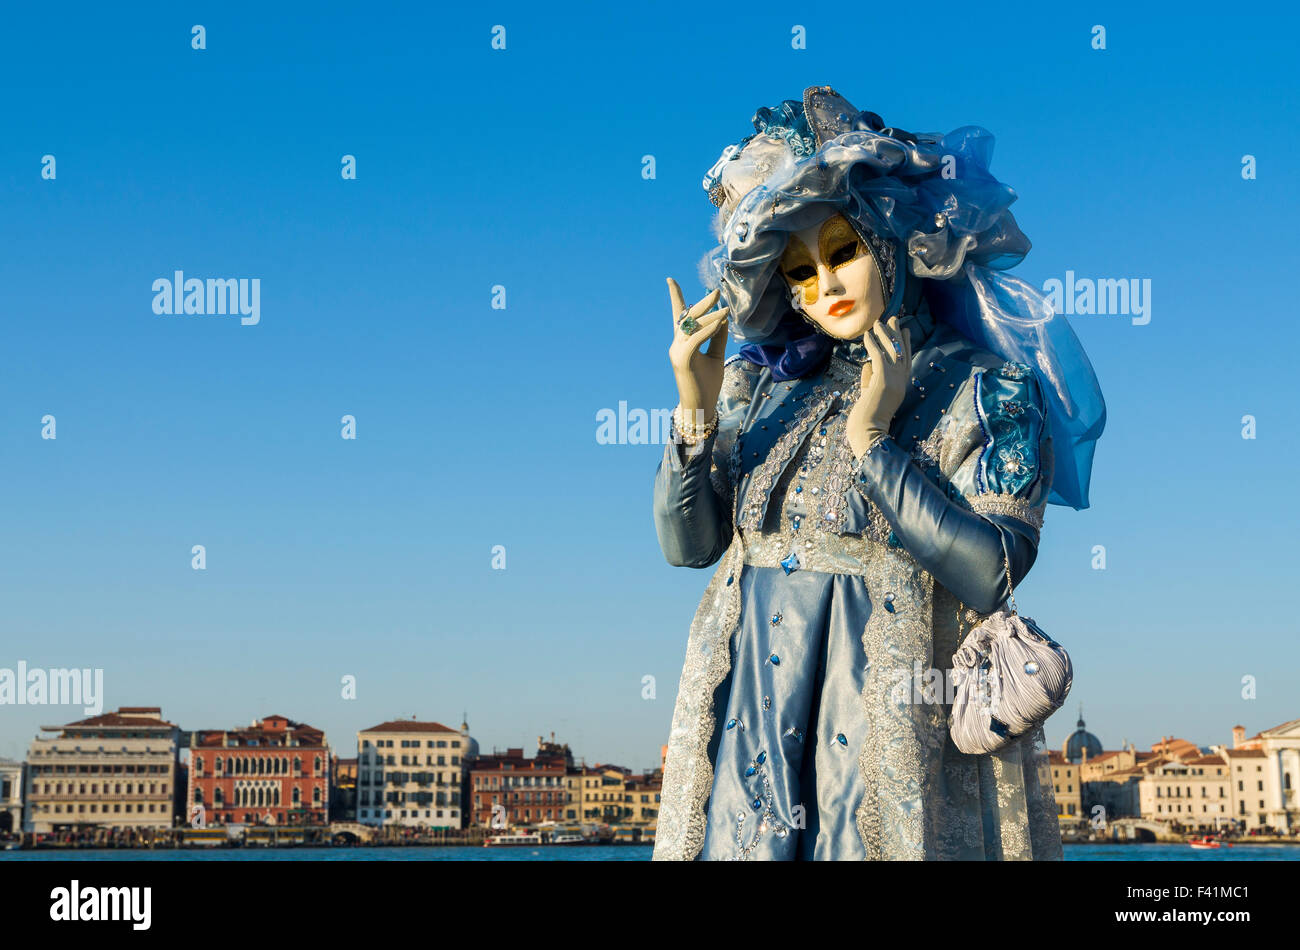 People are wearing imaginative venetian masks during the Carnevale Stock Photo